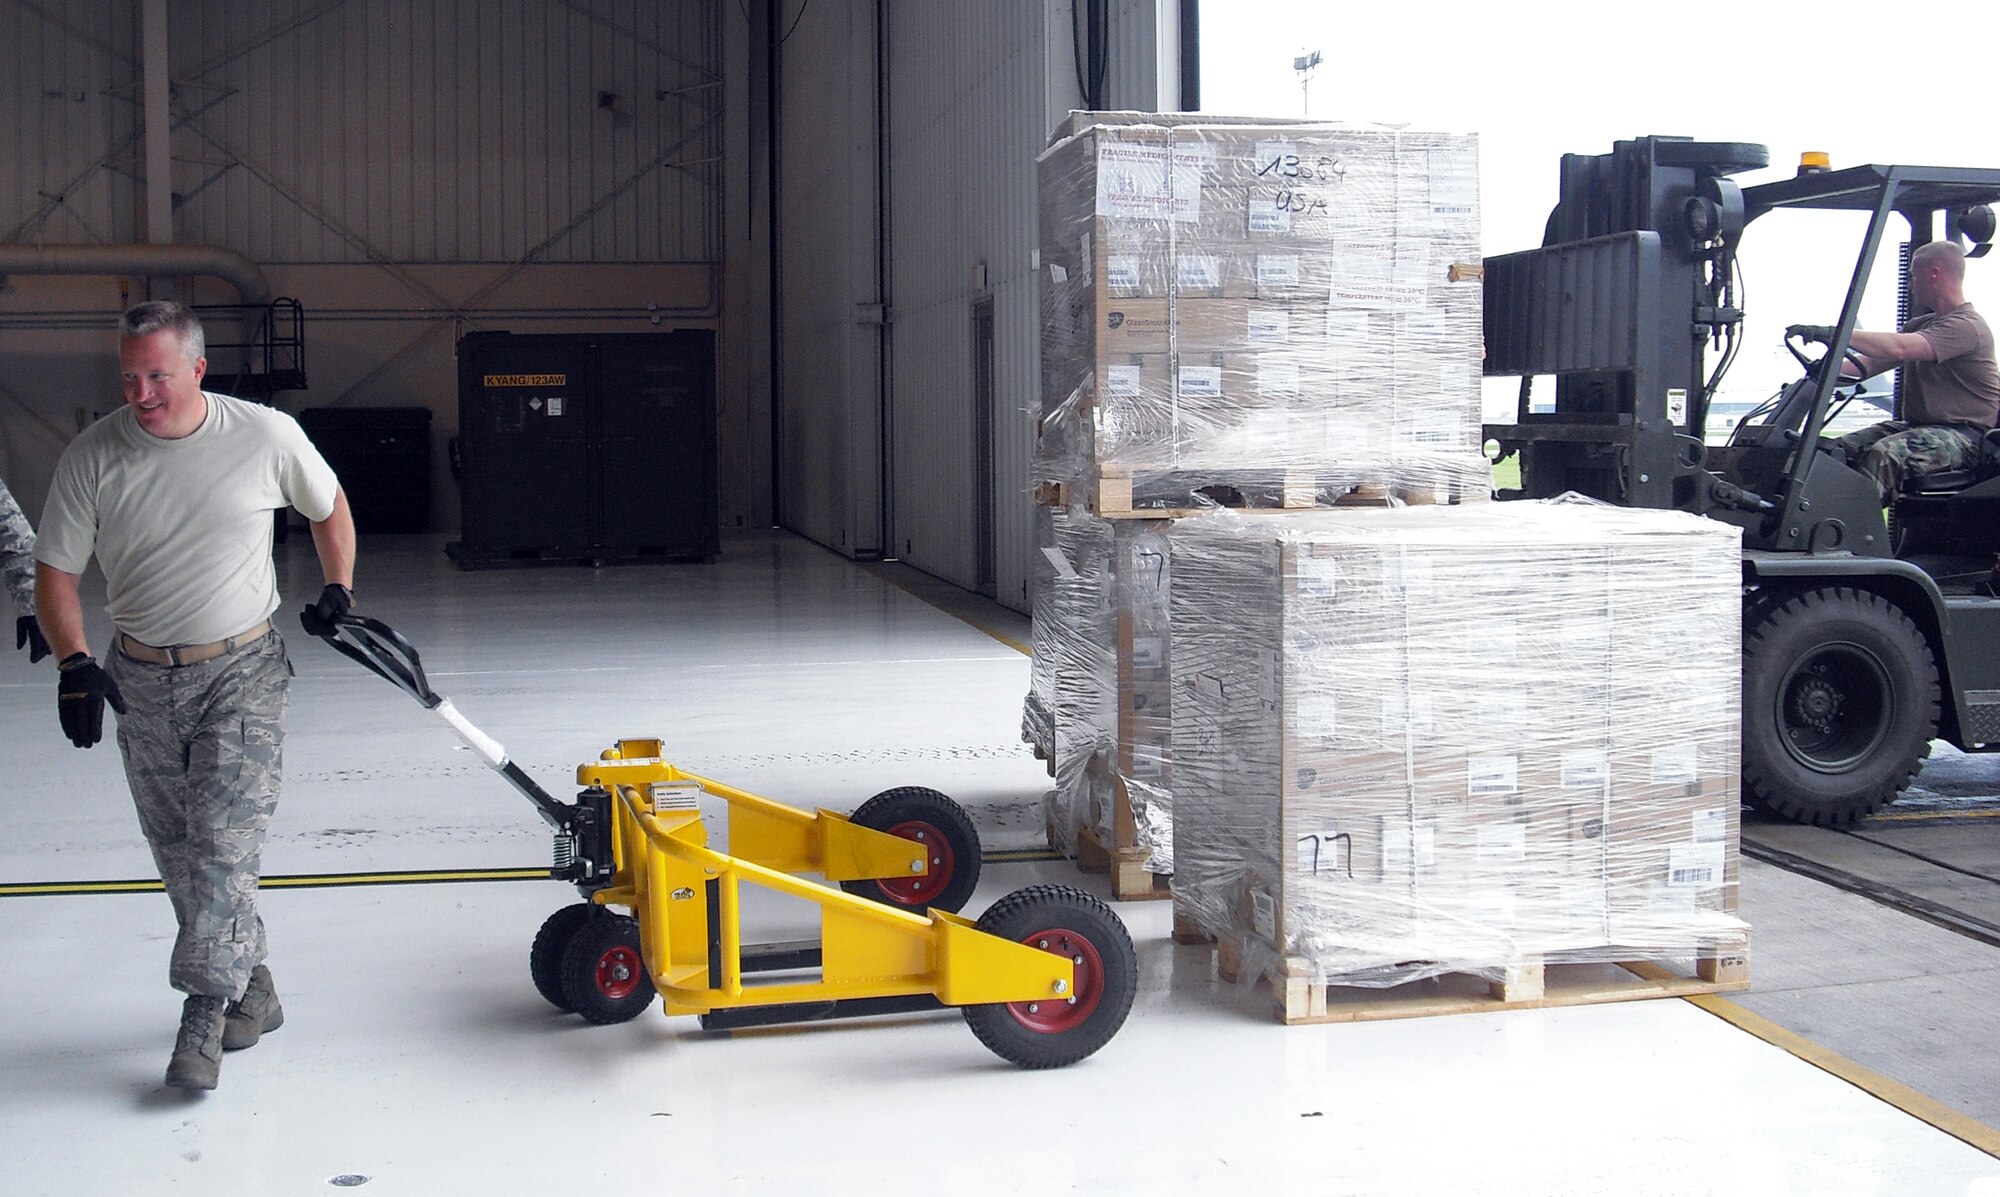 Senior Master Sgt. Wade Zinsmeister moves pallets of personal protective equipment and antiviral medications into the base Fuel Cell Hangar on April 30. The supplies were shipped to the base from the federal Strategic National Stockpile and were repackaged here for distribution to county health departments across the Commonwealth. The effort was part of the state?s response to the potential threat of a Swine Flu pandemic. (KyANG Photo by Maj. Katrina Johnson)